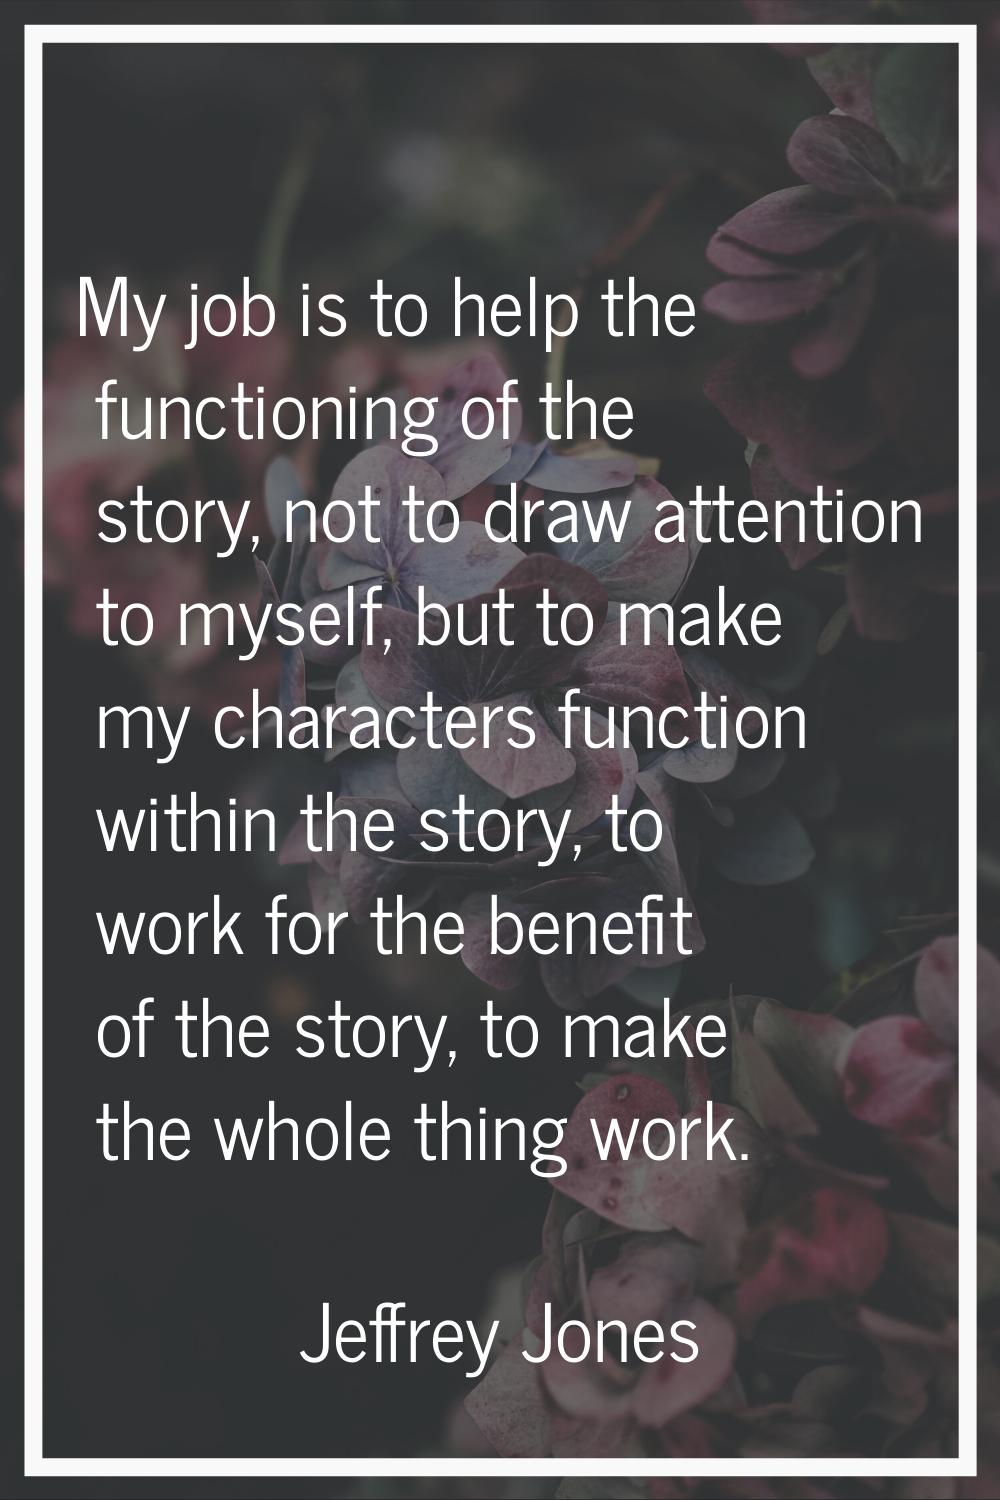 My job is to help the functioning of the story, not to draw attention to myself, but to make my cha